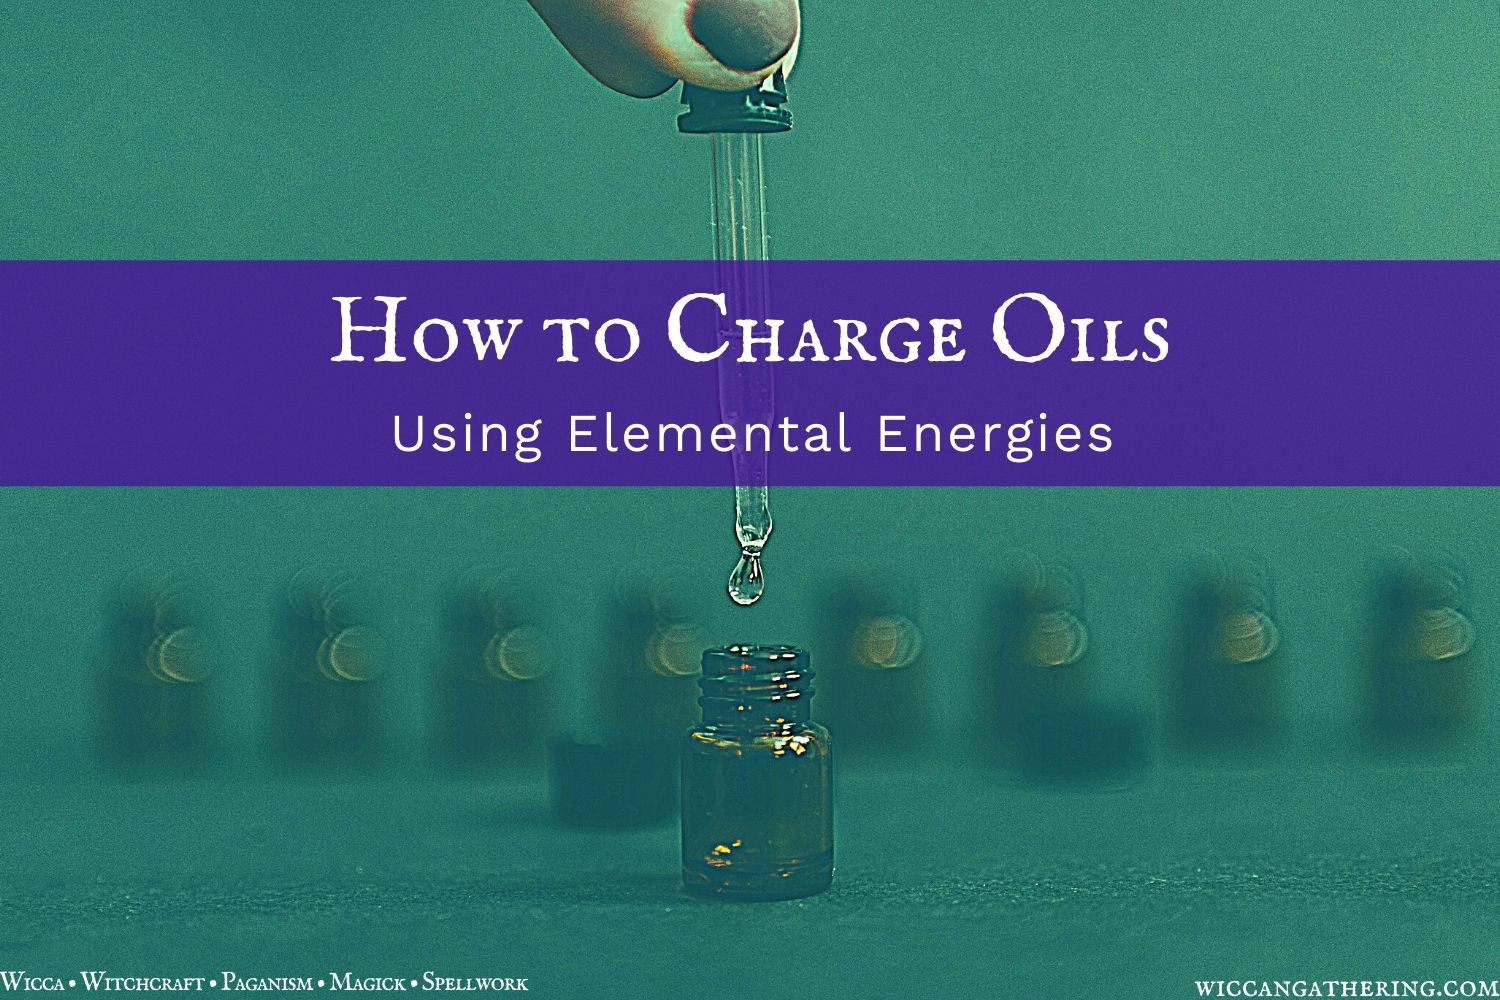 How To Charge Oils in Wicca